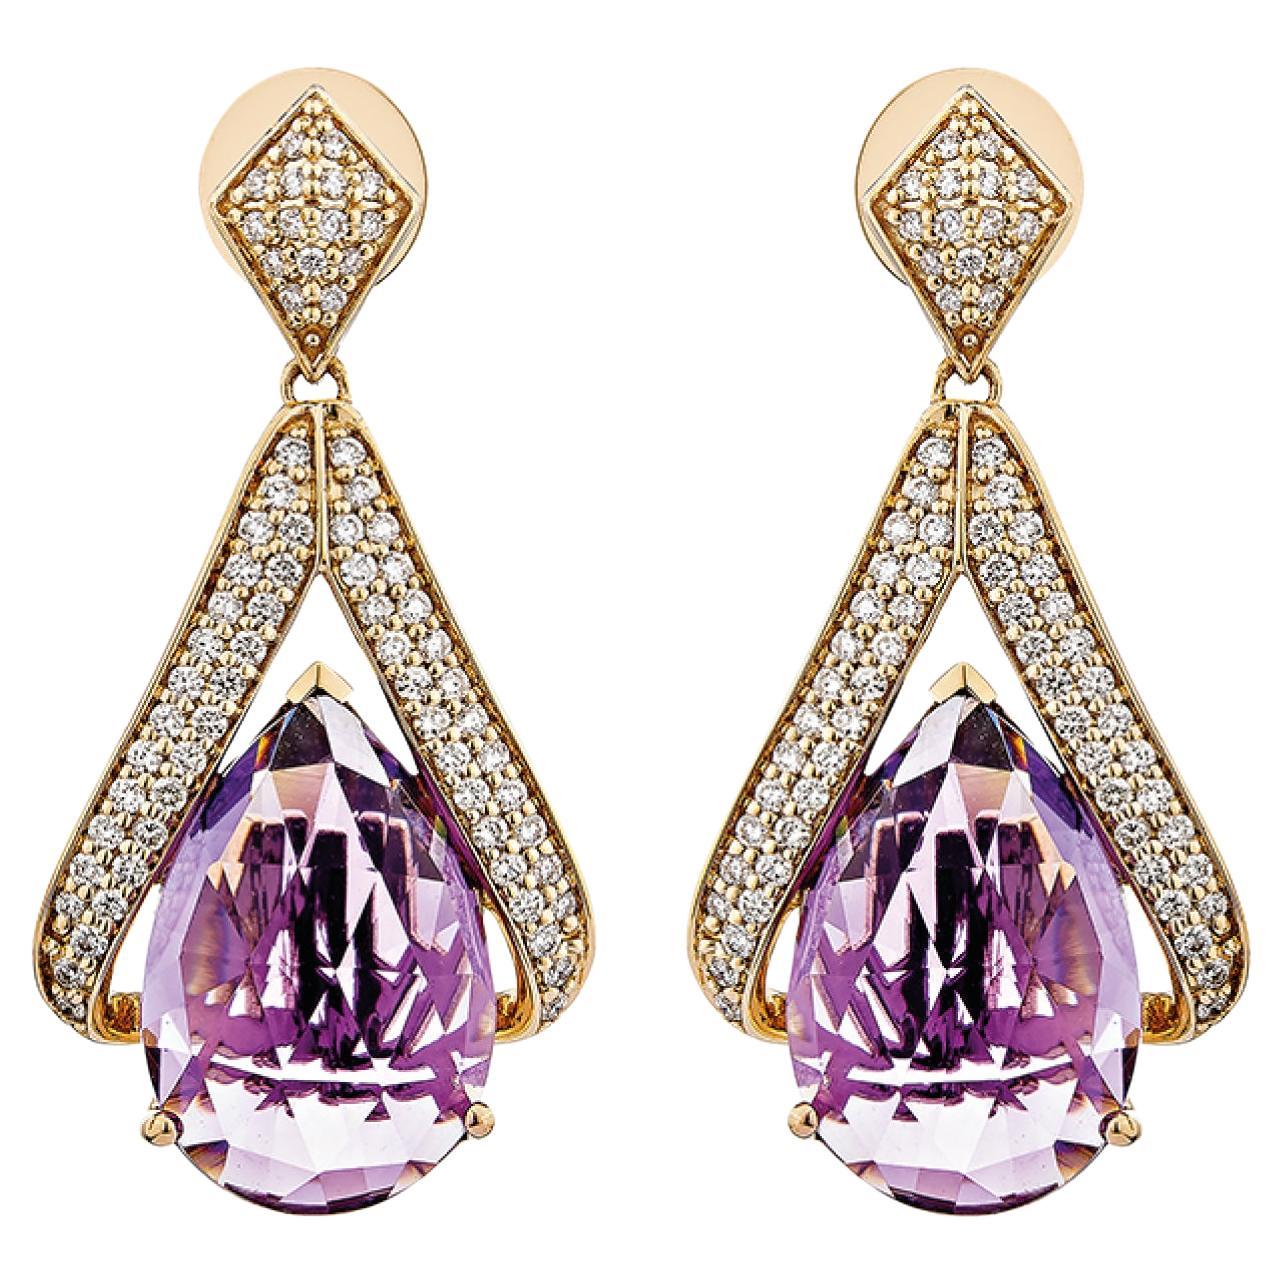 11.968 Carat Amethyst Drop Earring in 18Karat Rose Gold with White Diamond. For Sale